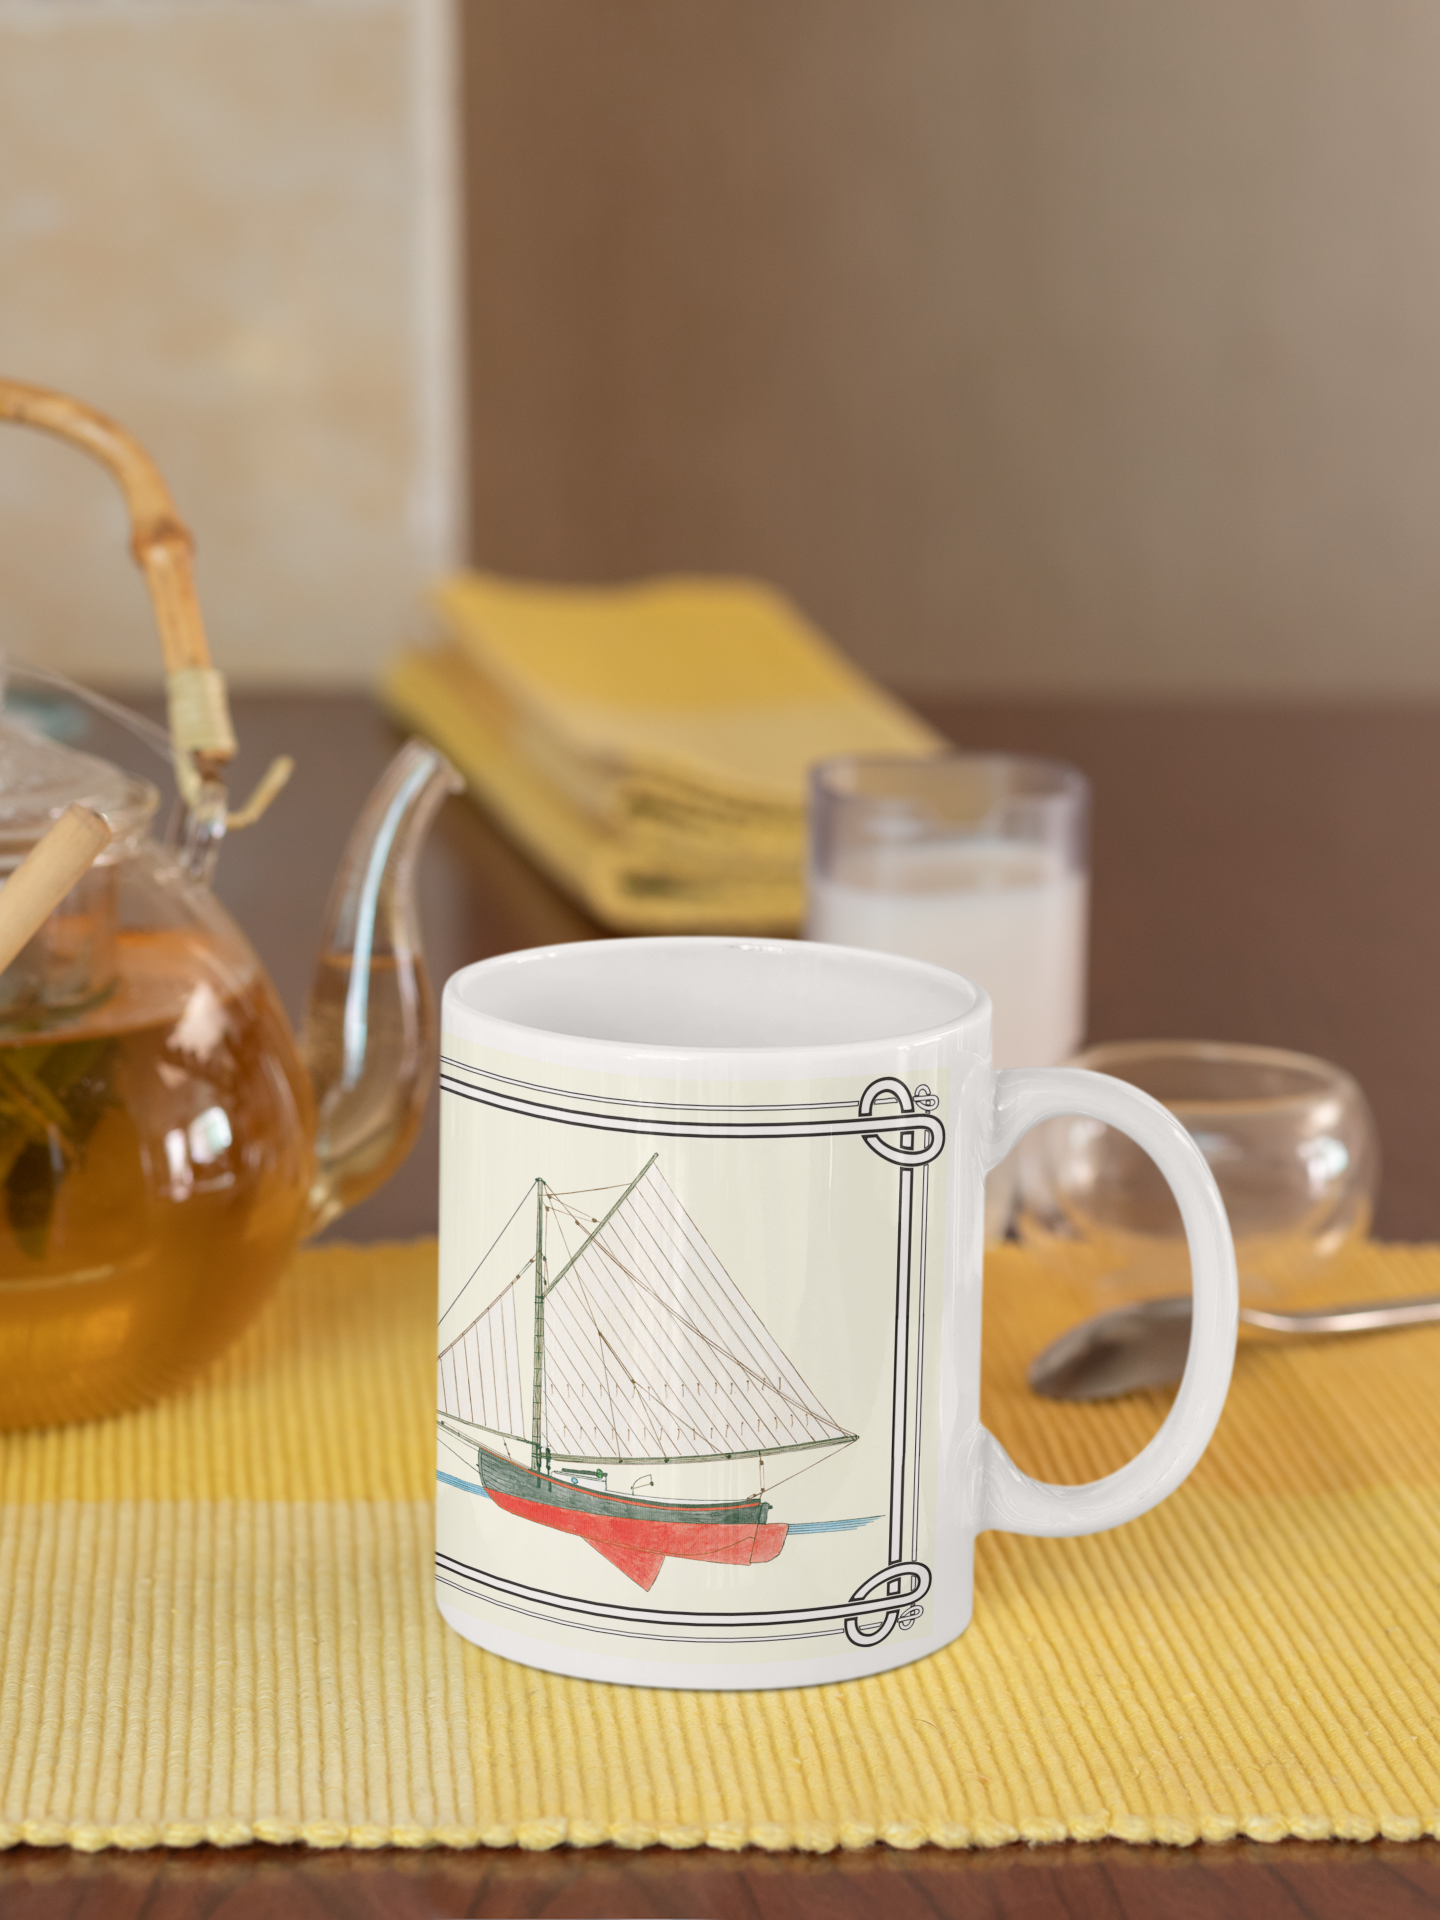 The Breeze is a Noank Fishing Sloop built in 1898 and is similar in style to the working Cape Cod catboats.The mug design is a reproduction of an original watercolor by Lee M. Buchanan and has the image on the front and back of the mug.